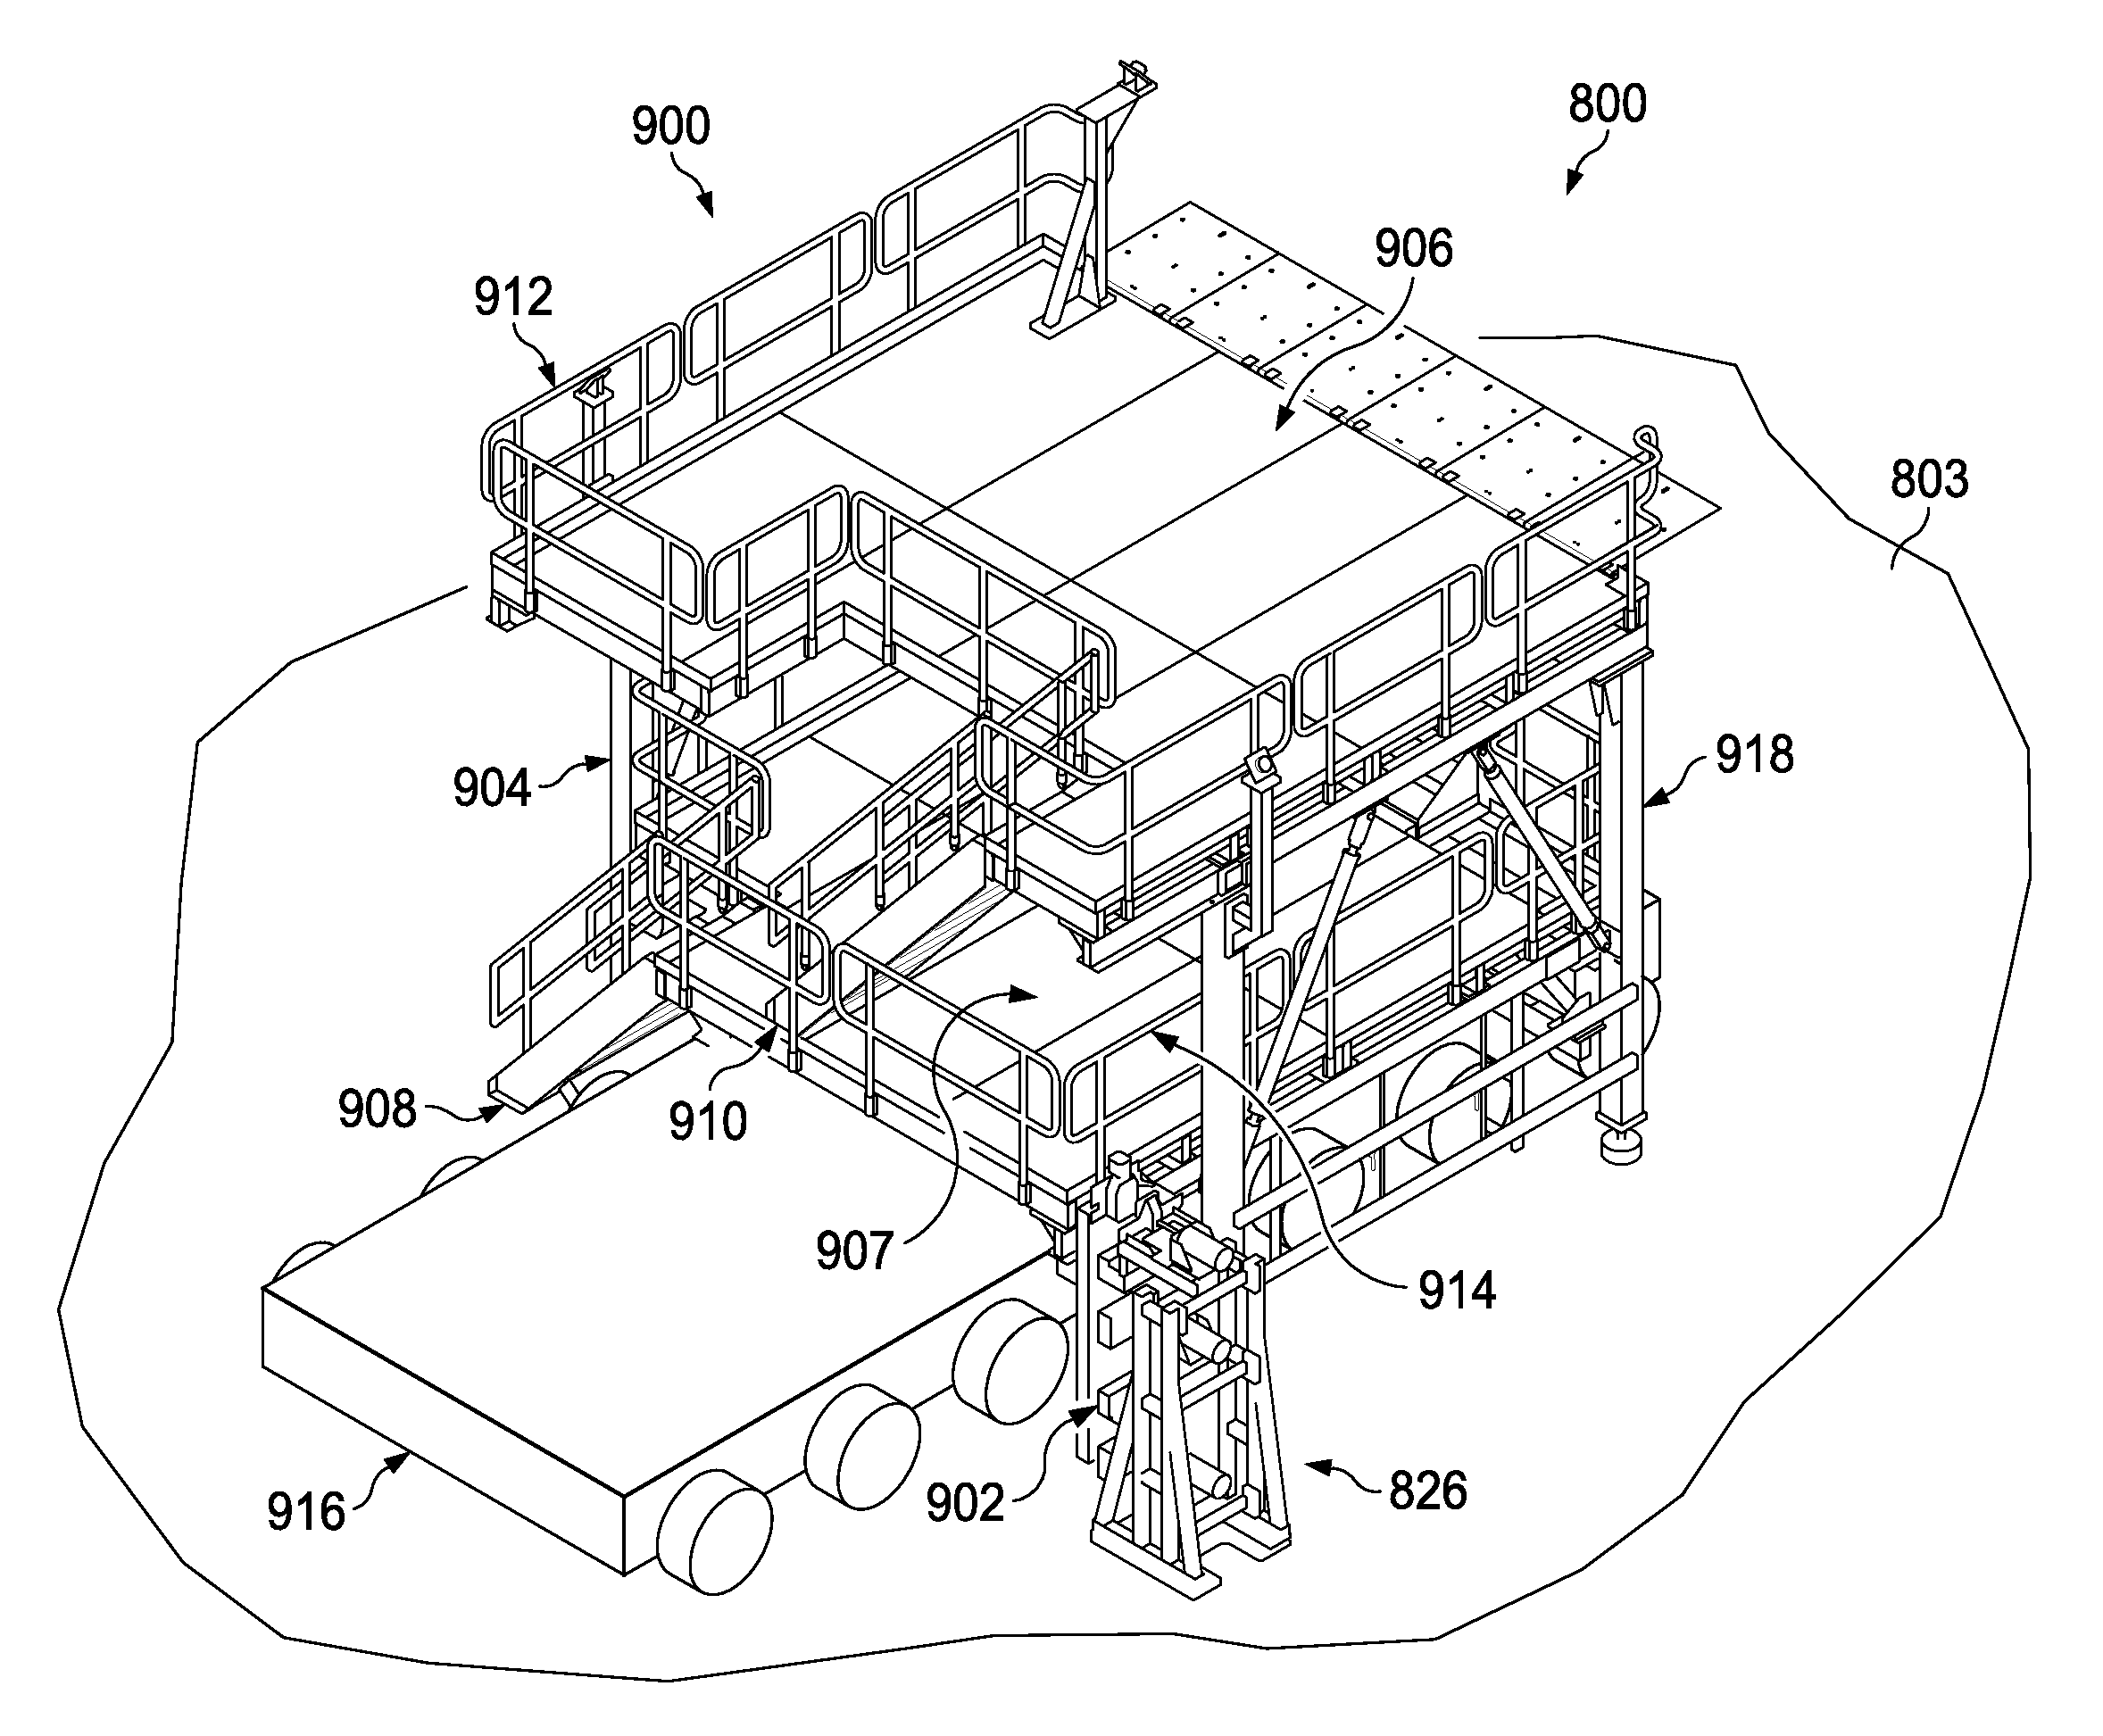 Utility Fixture for Creating a Distributed Utility Network